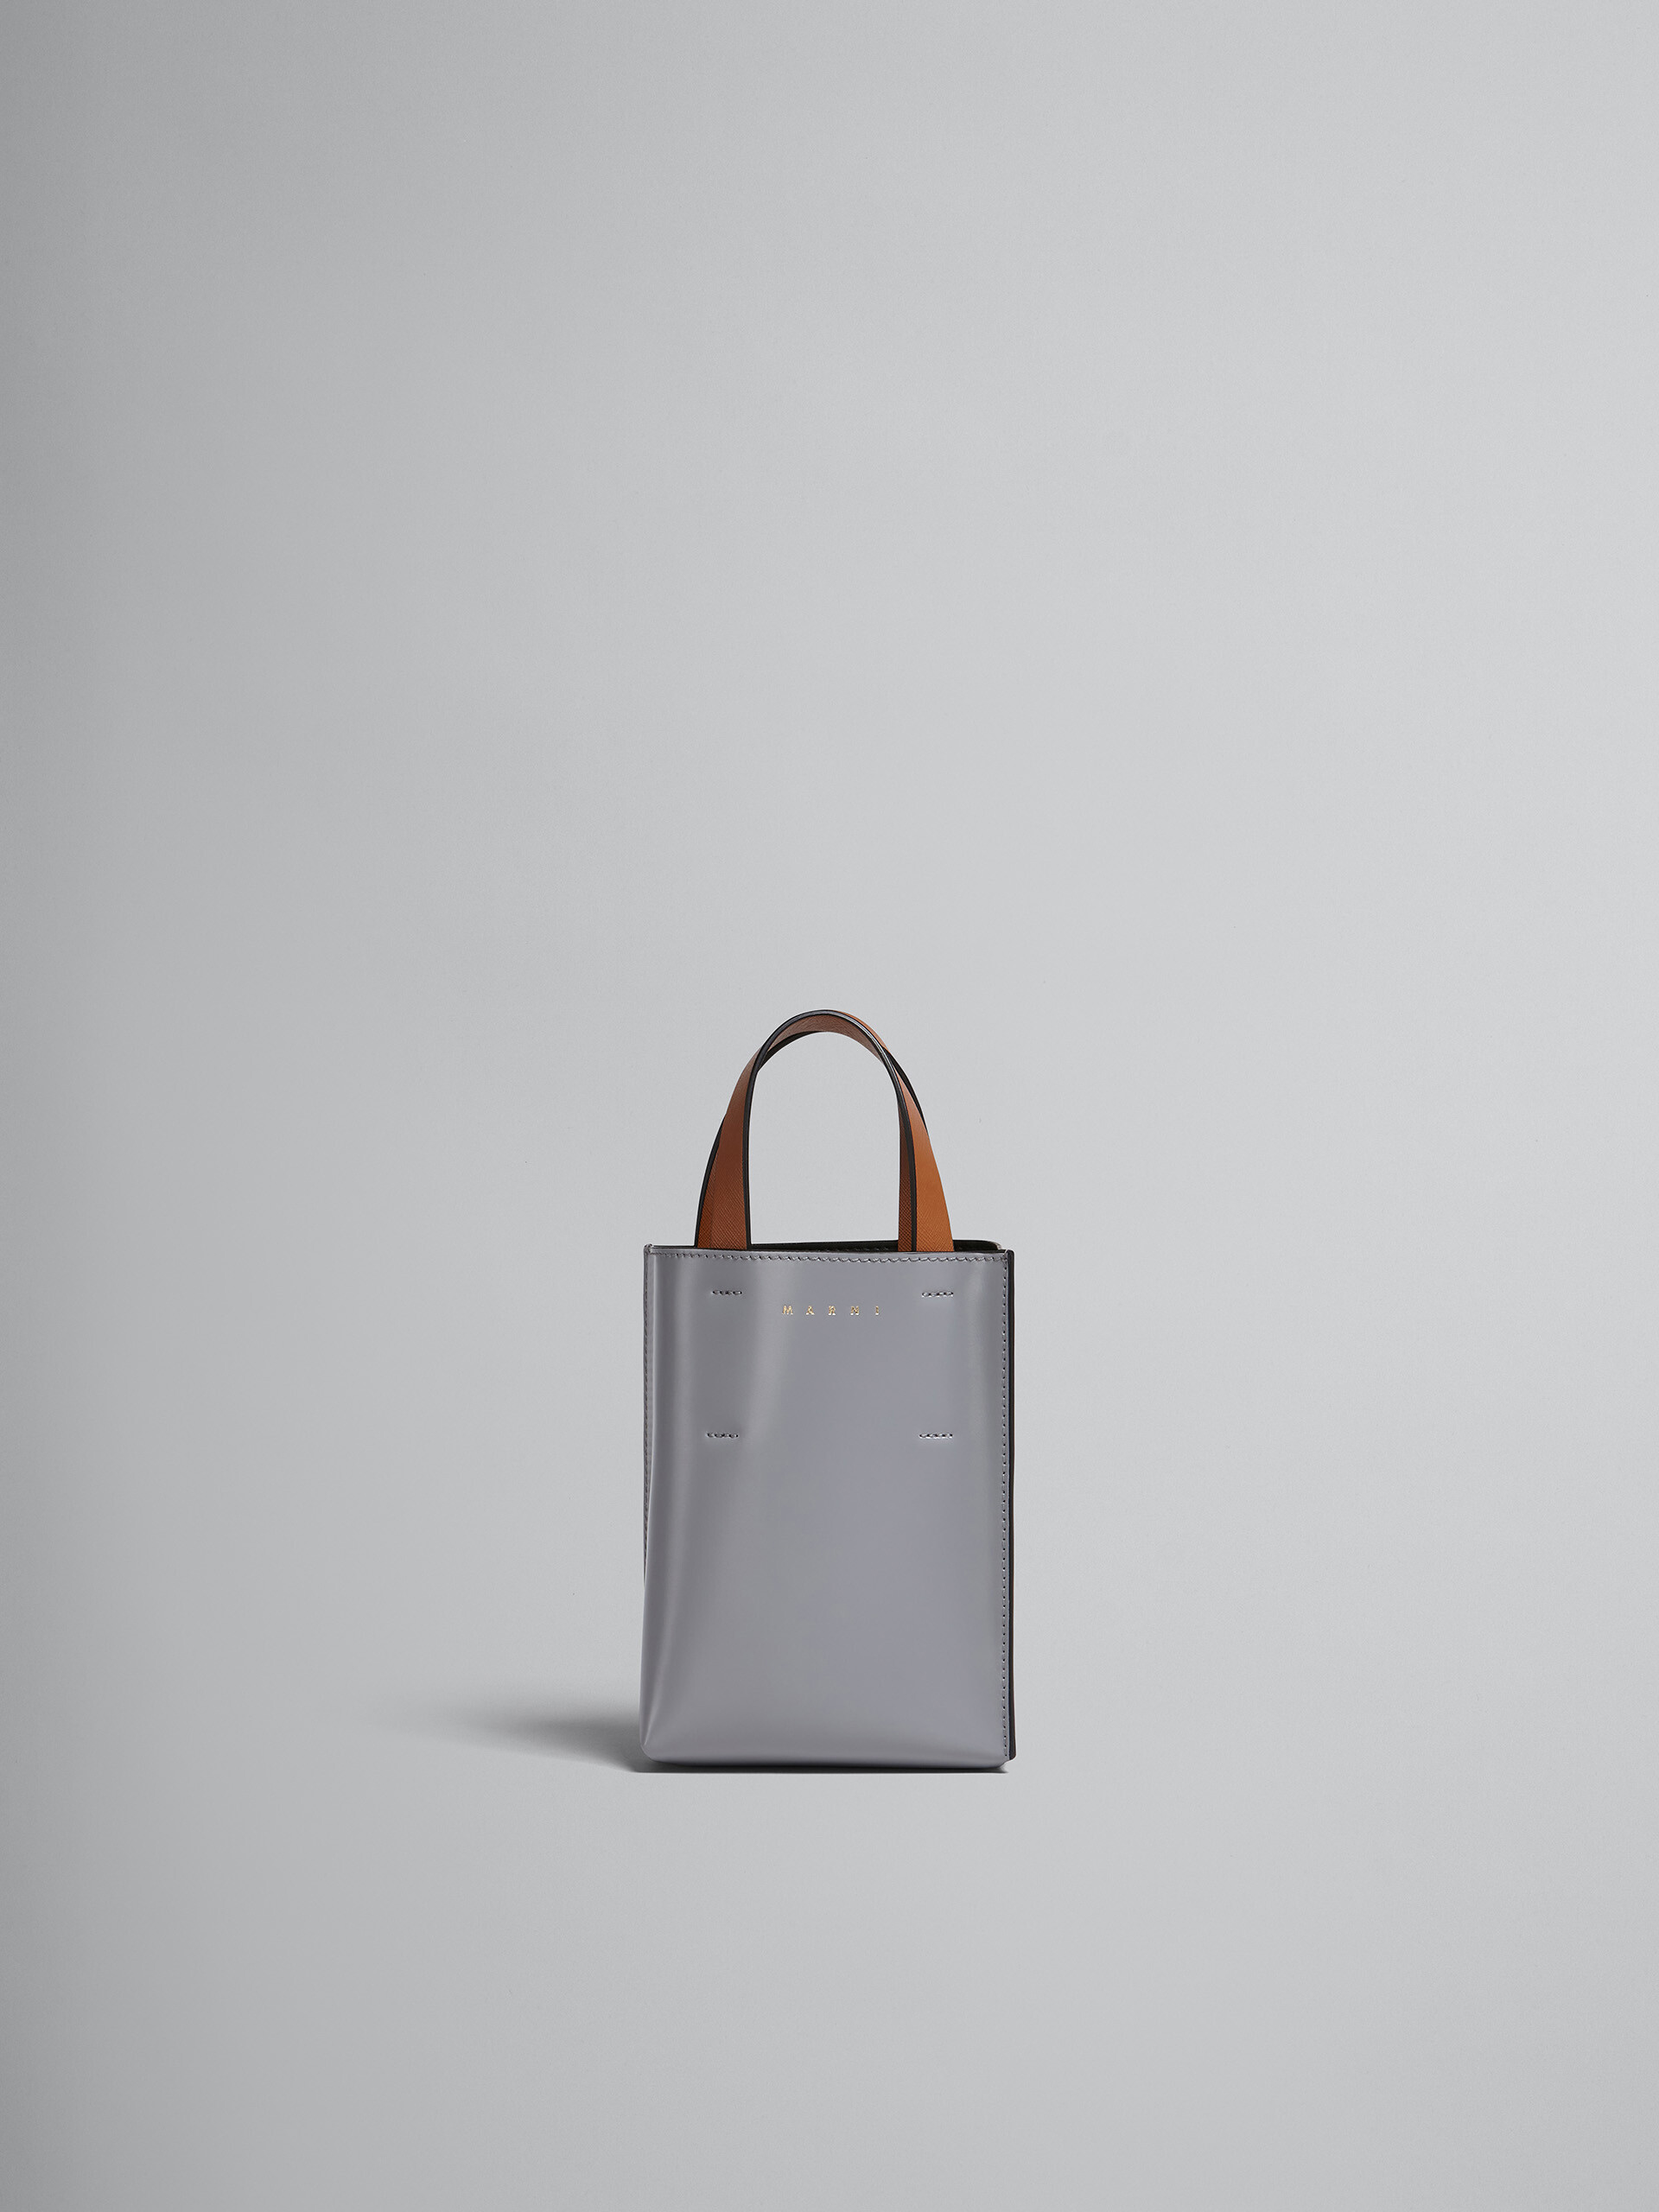 MUSEO nano bag in grey and purple leather - Shopping Bags - Image 1